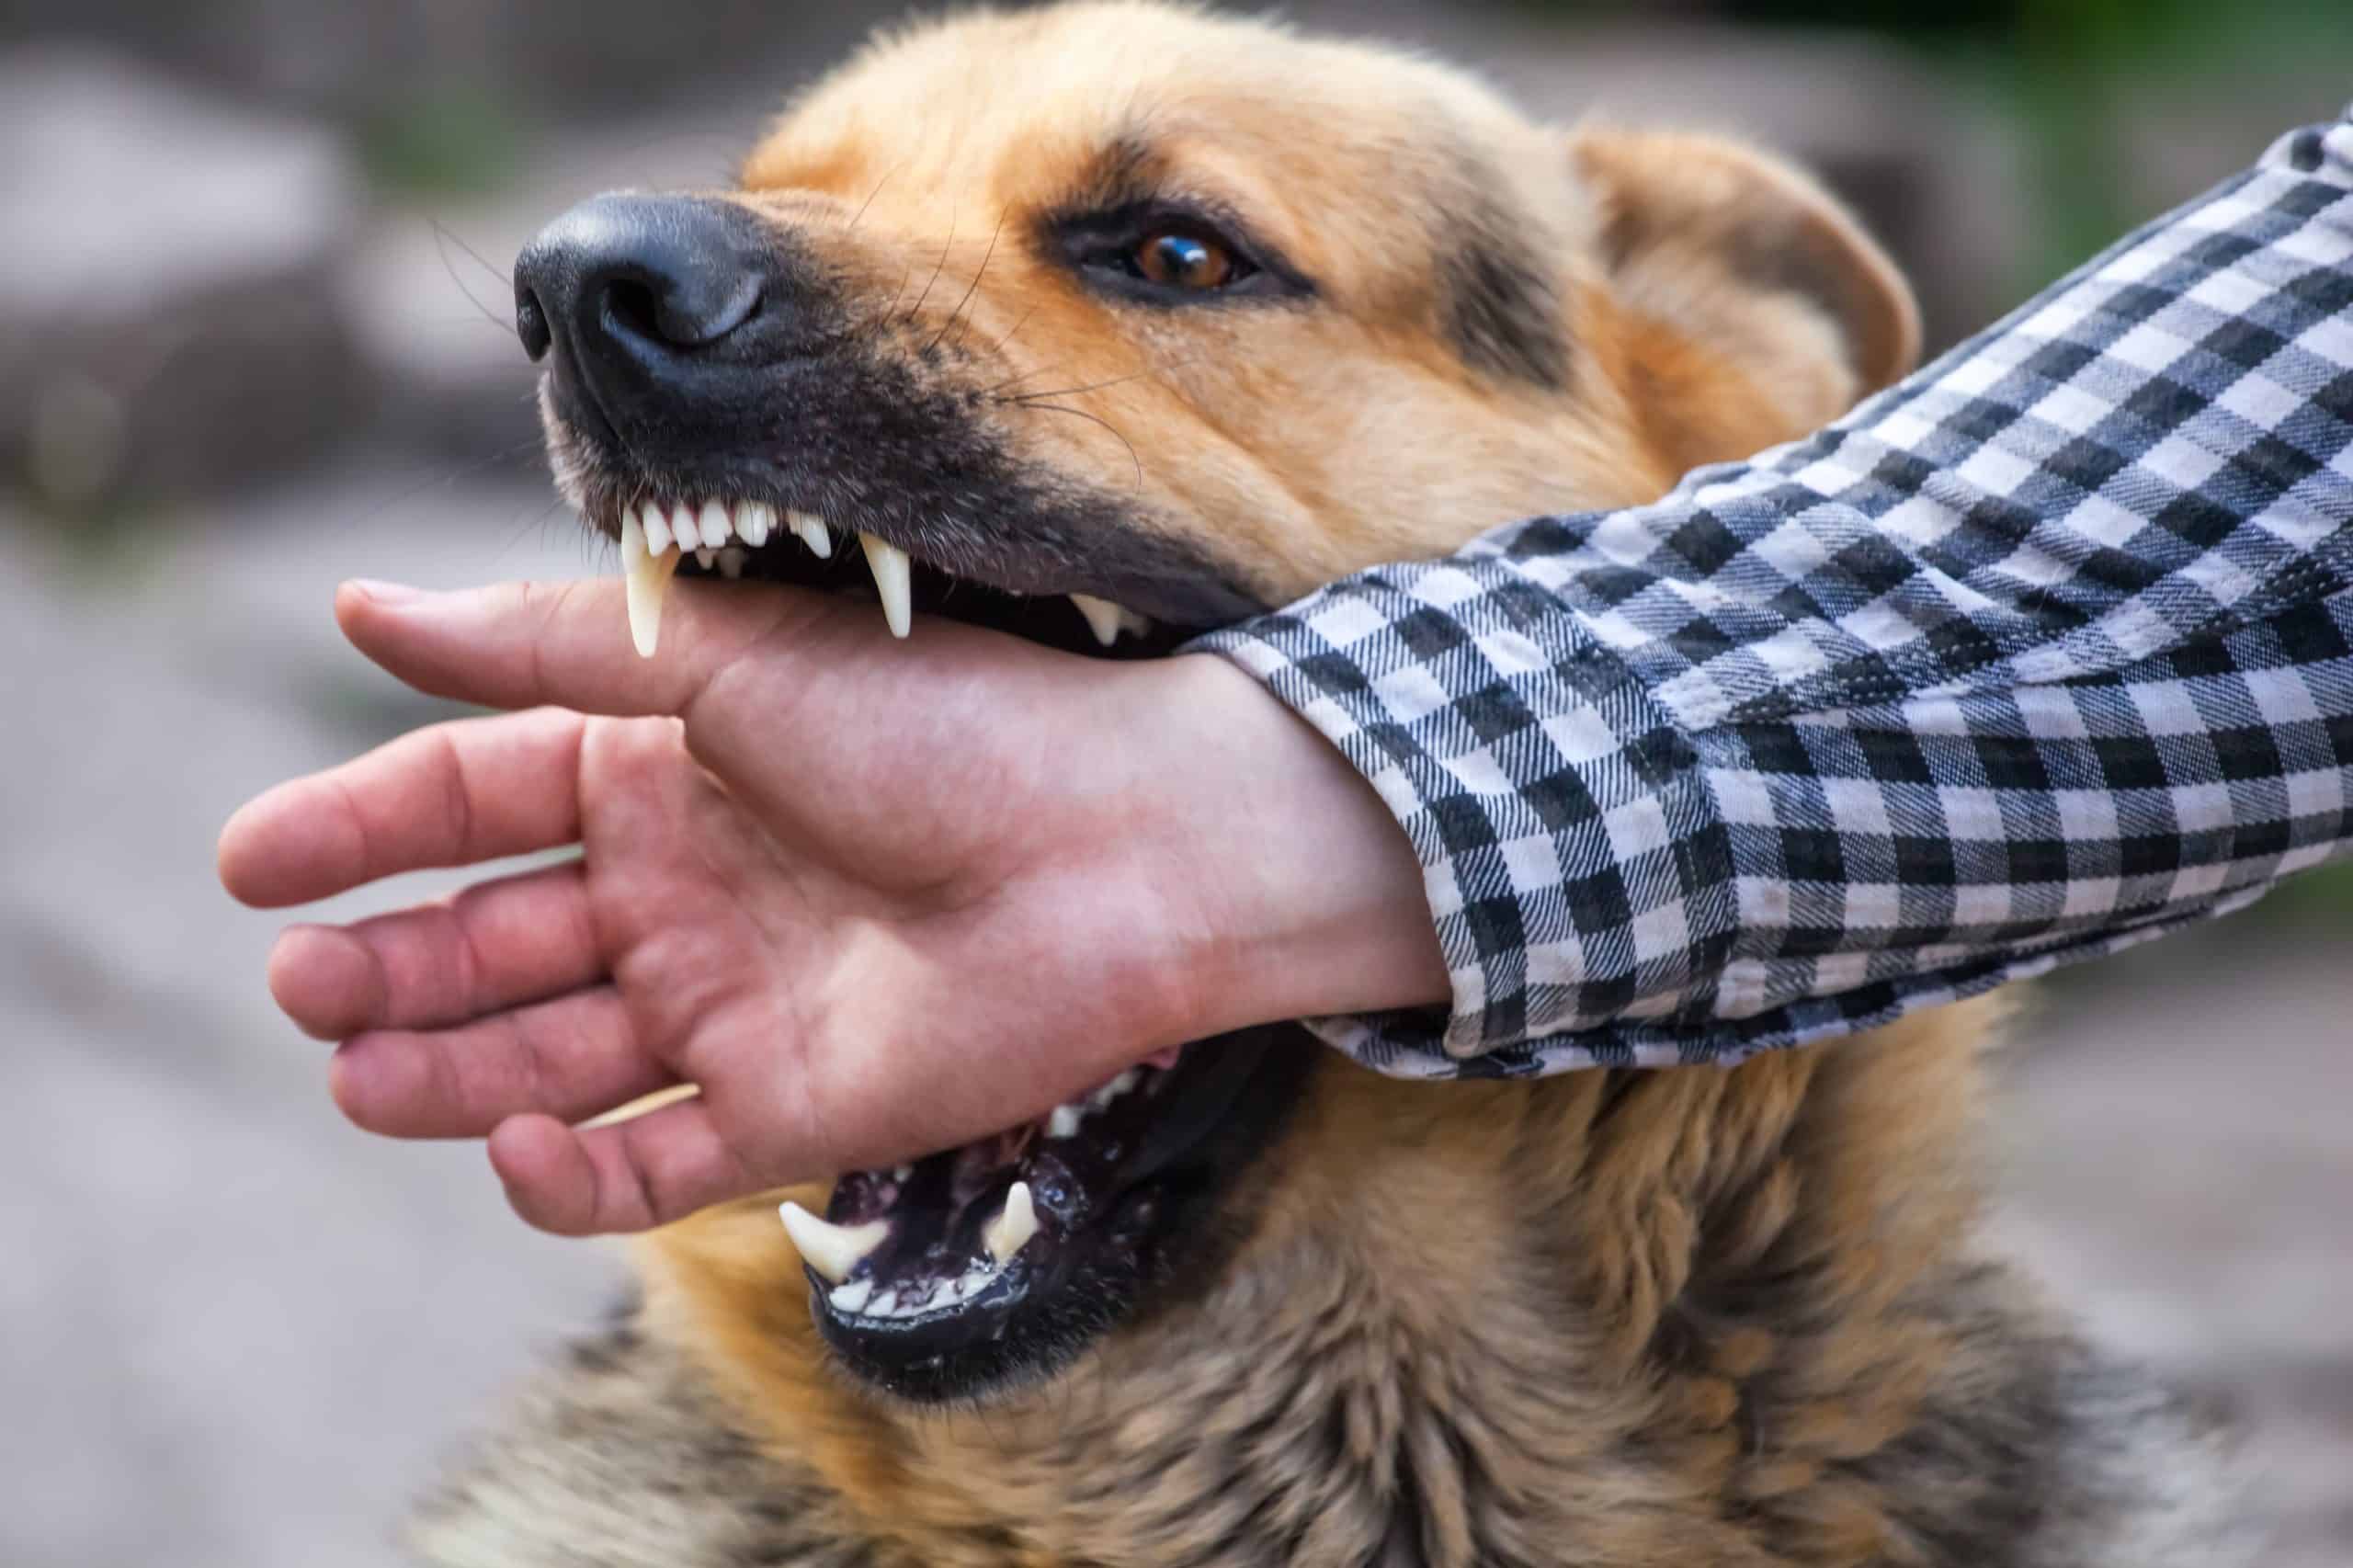 Aggressive dog breeds aren't always violent but can be when protective, fearful, or anxious.